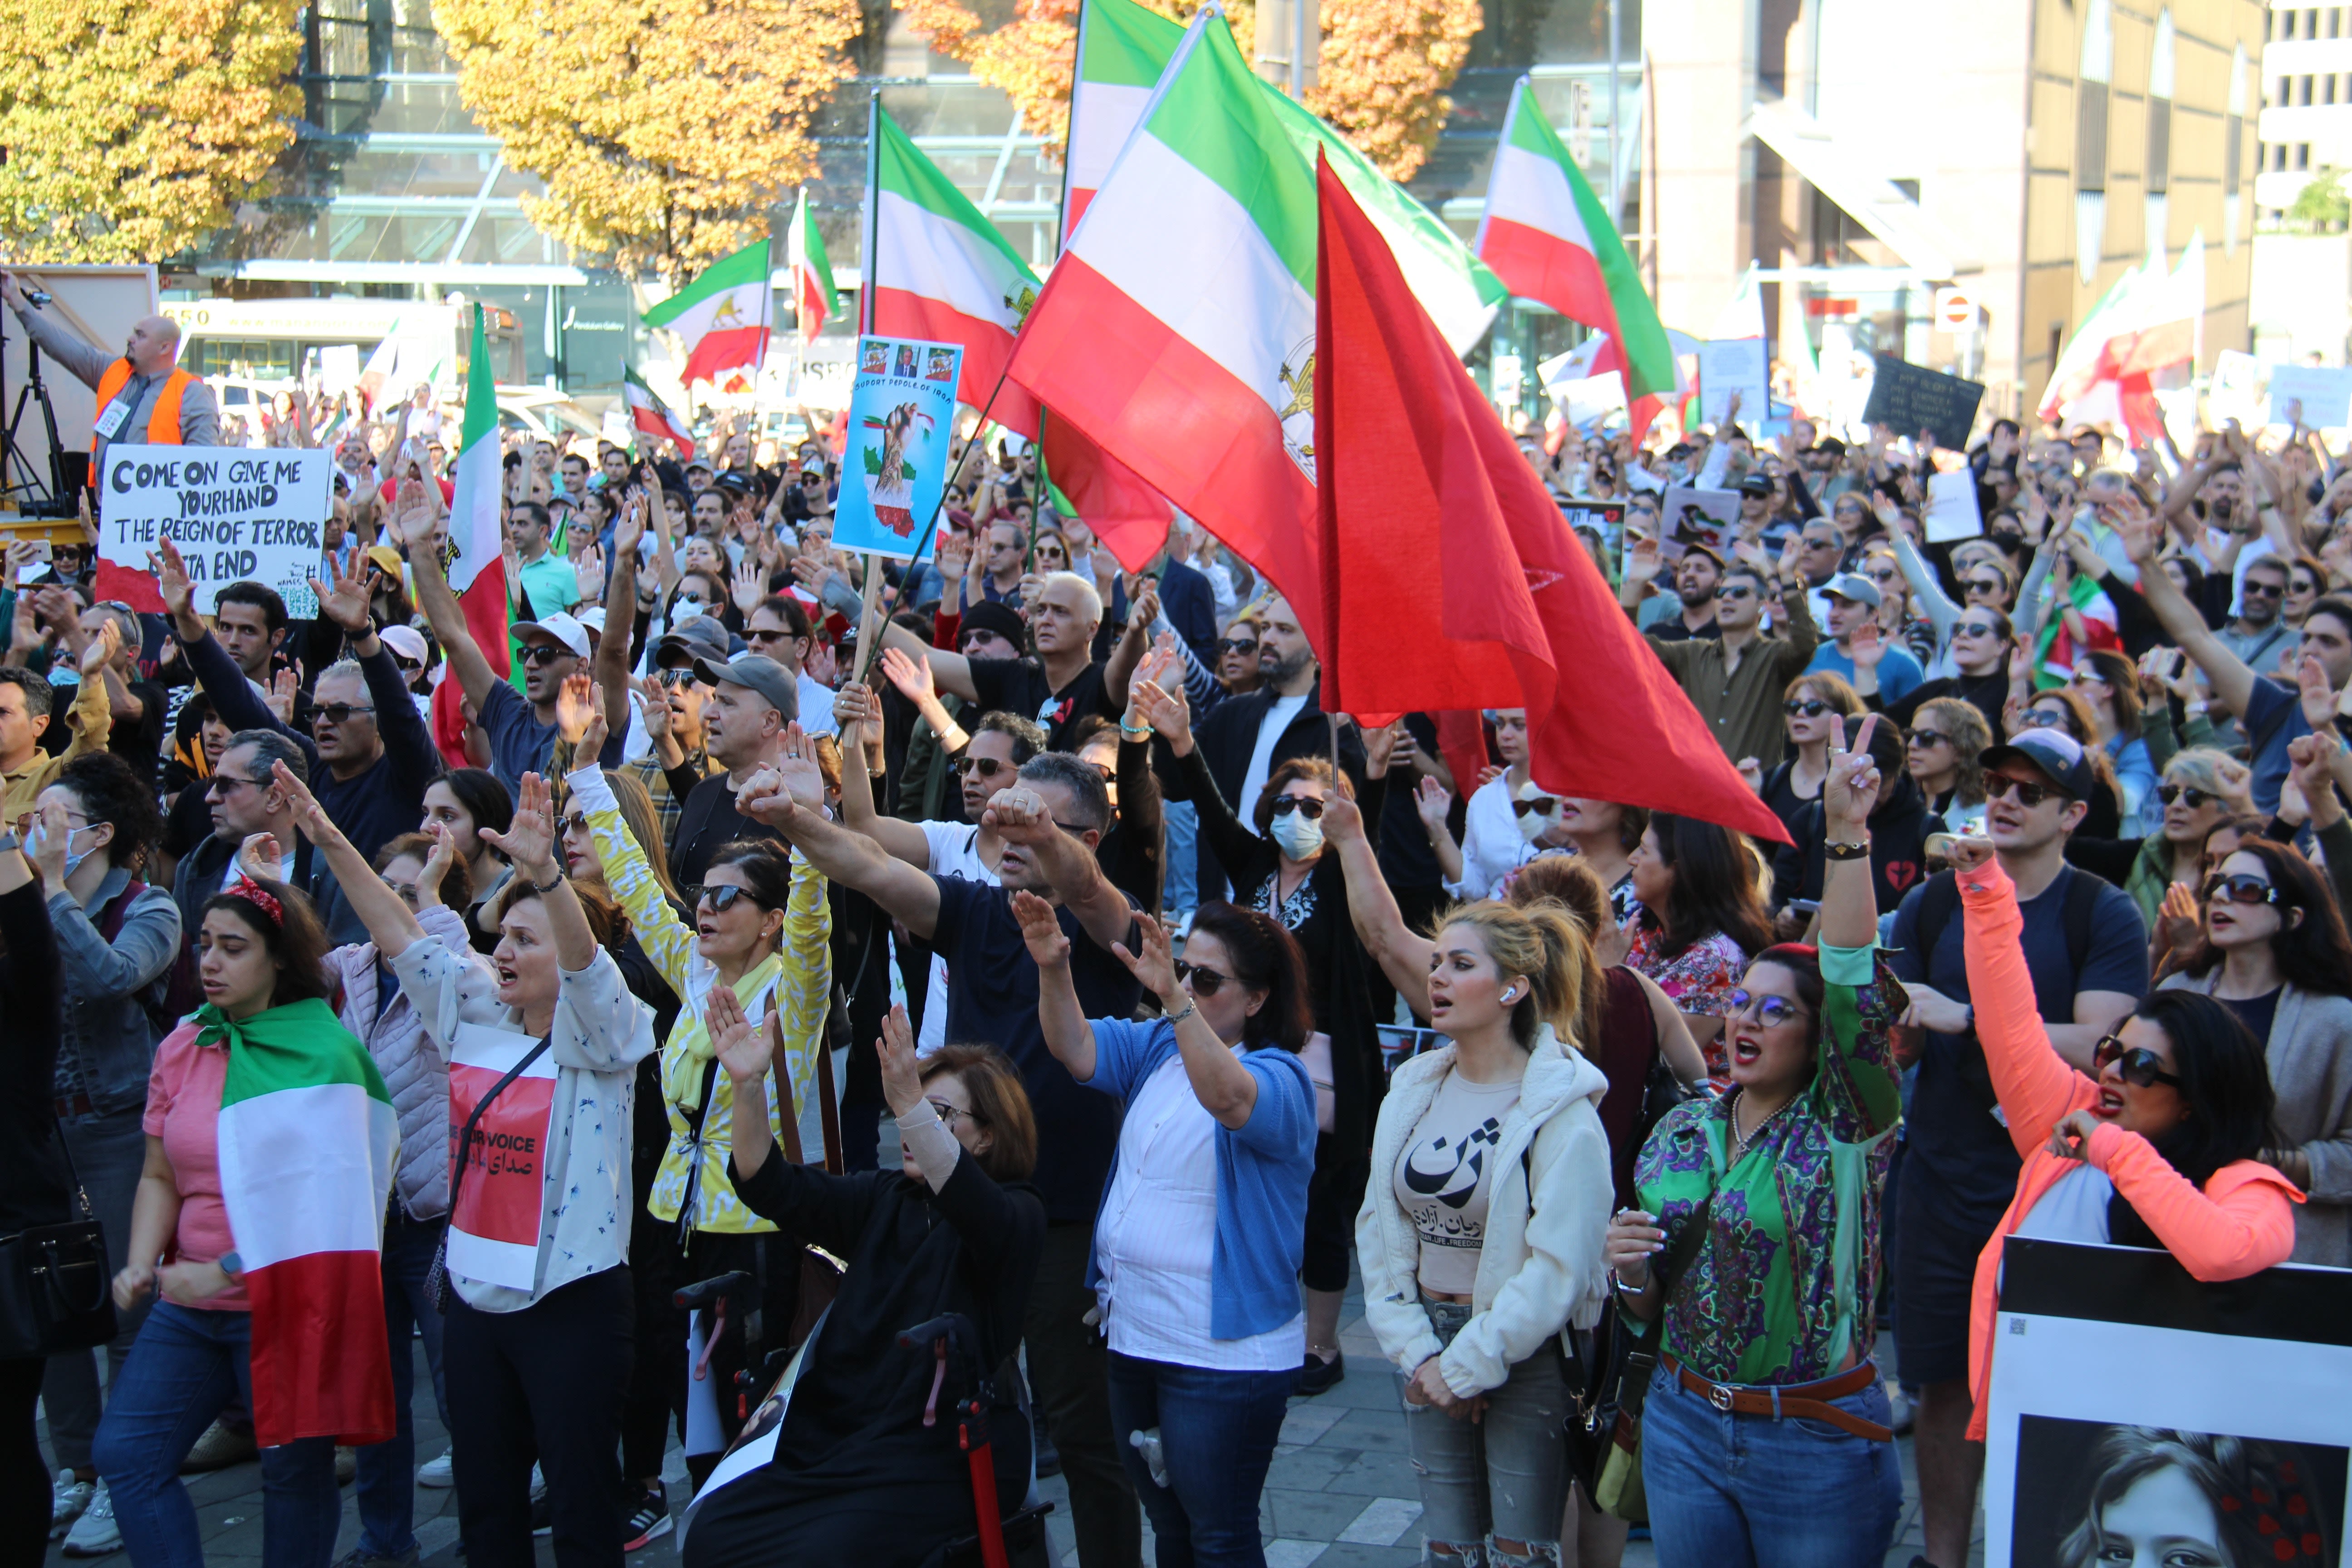 Crowd of People Protesting on Street Holding Flags and Posters